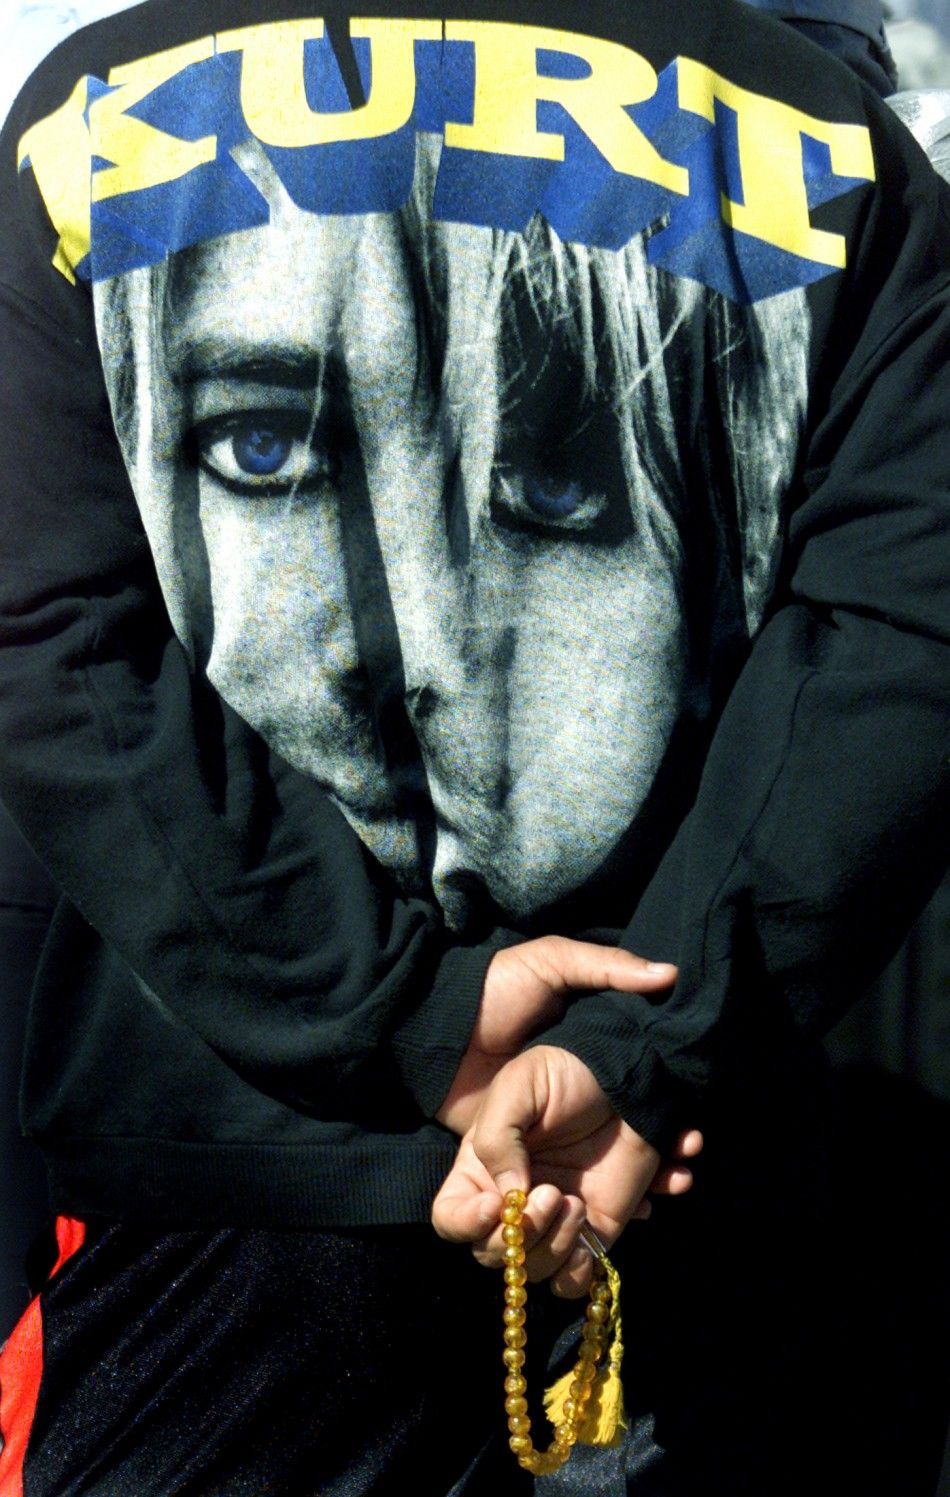 An Iraqi policeman, wearing a shirt emblazoned with a picture of the rock band Nirvanas late frontman Kurt Cobain, during a 2003 demonstration in Baghdad